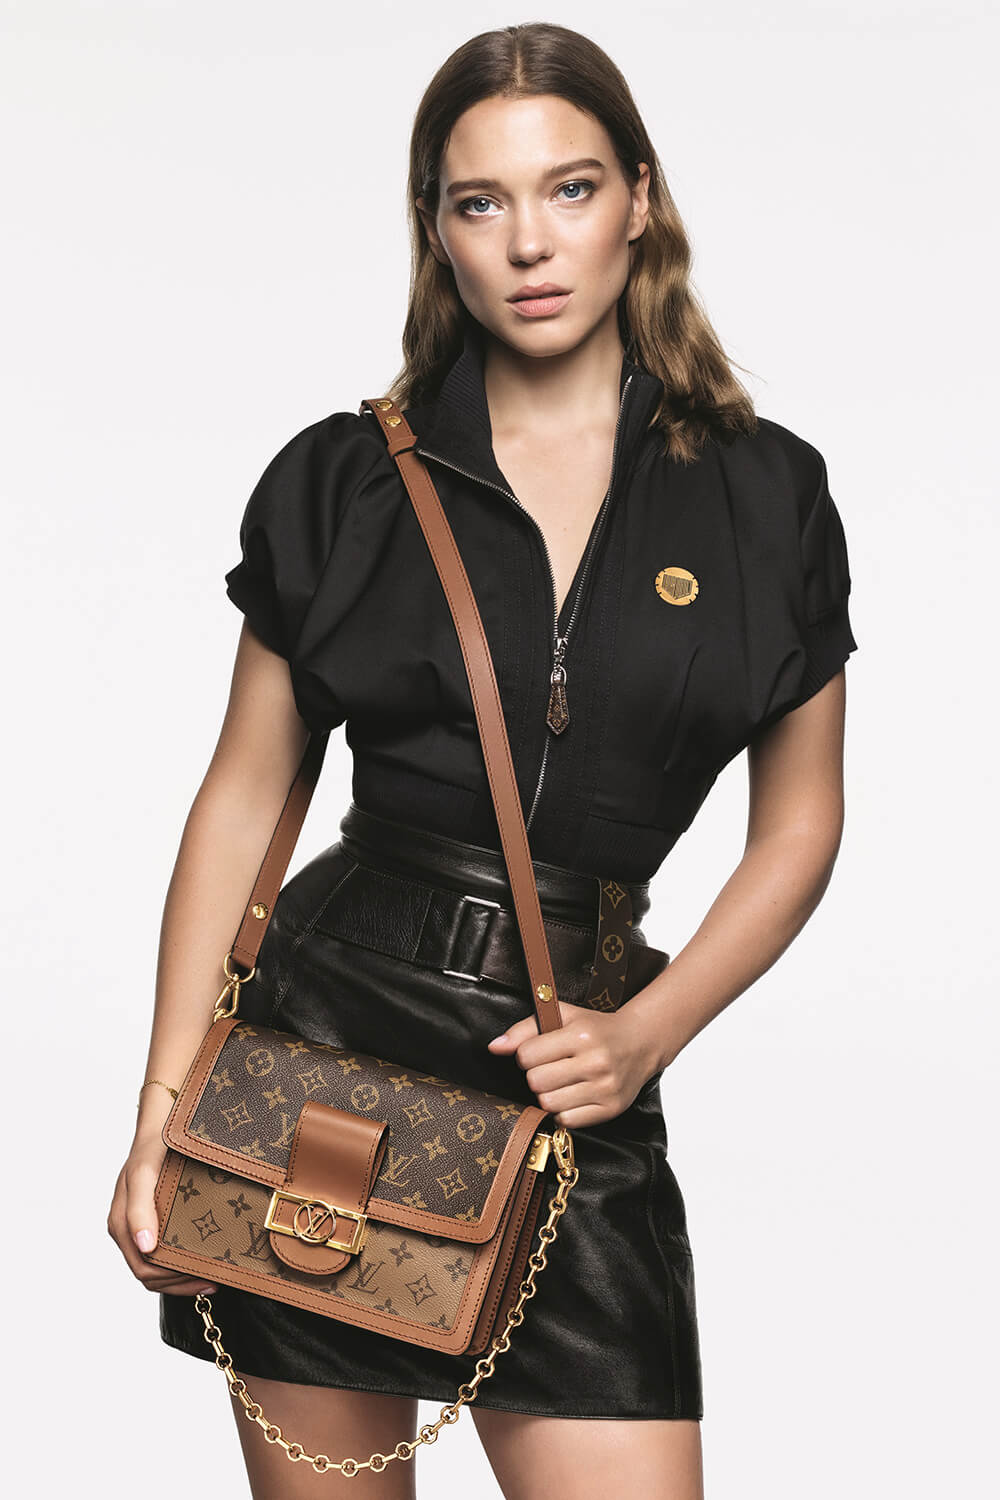 Léa Seydoux Stars In First Ad Campaign For Louis Vuitton [PHOTOS] –  Footwear News